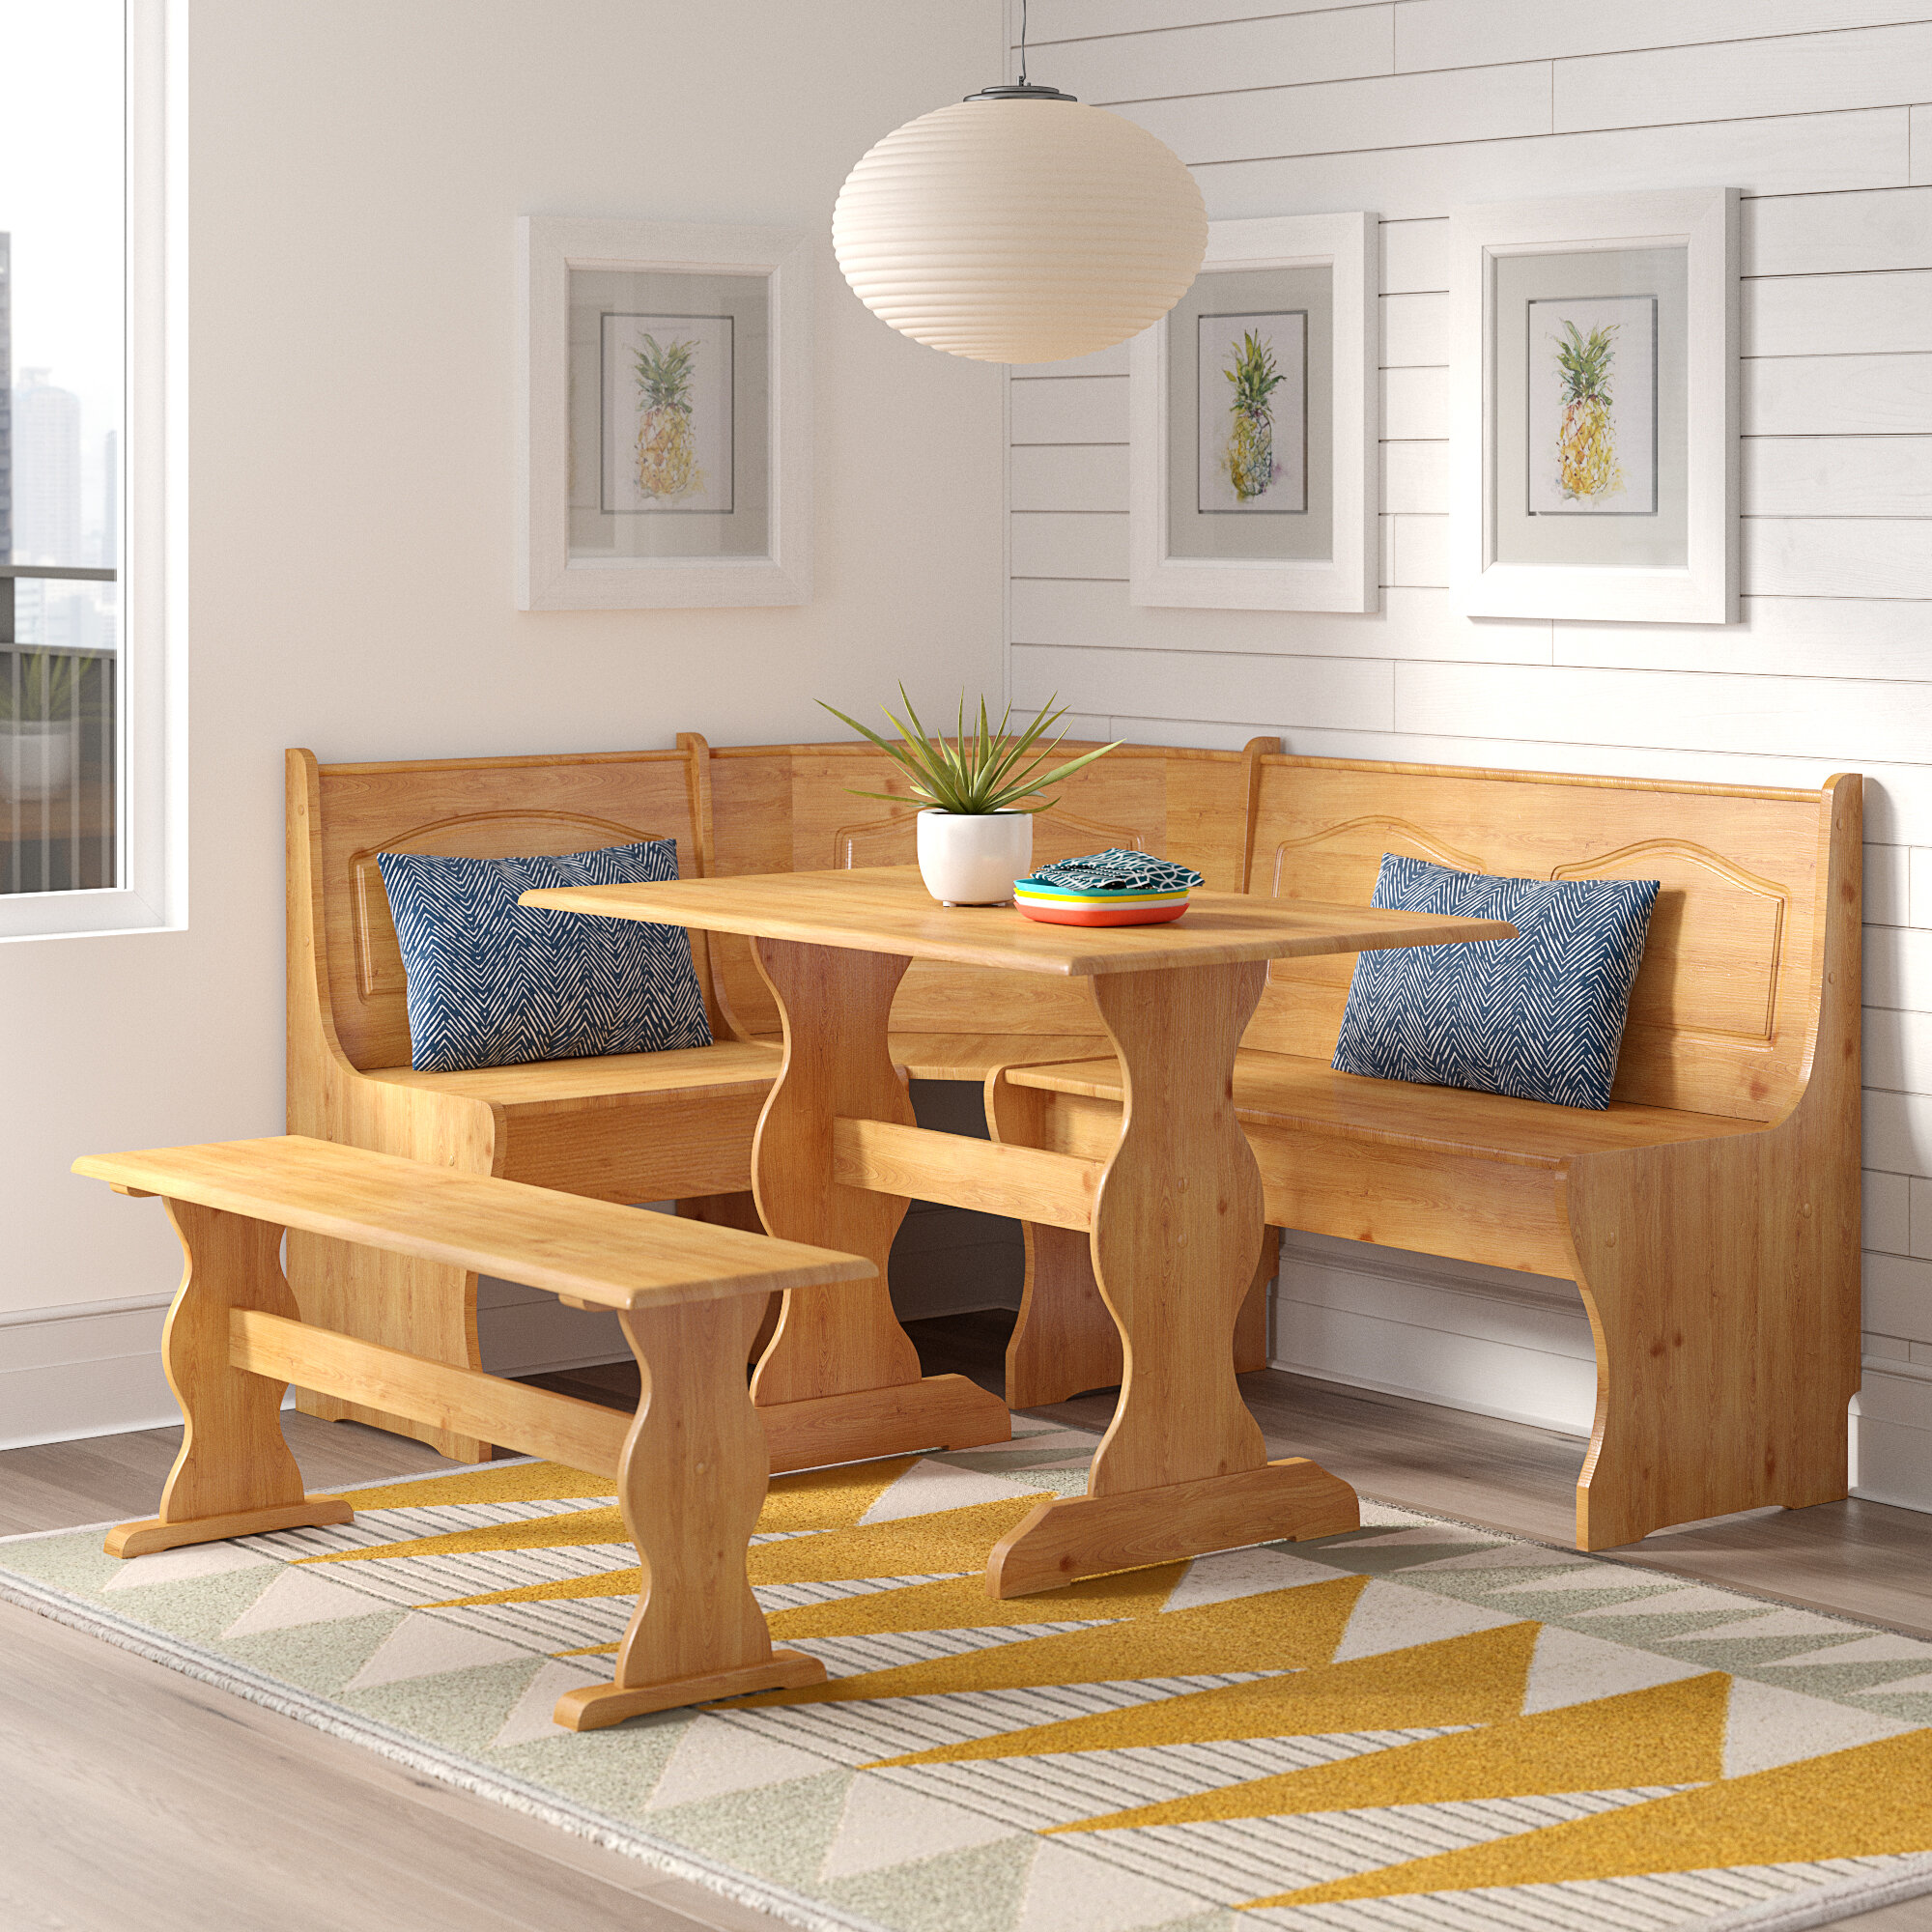 Country Style White And Natural Finish Wood Corner Nook Dining Table Bench  Set